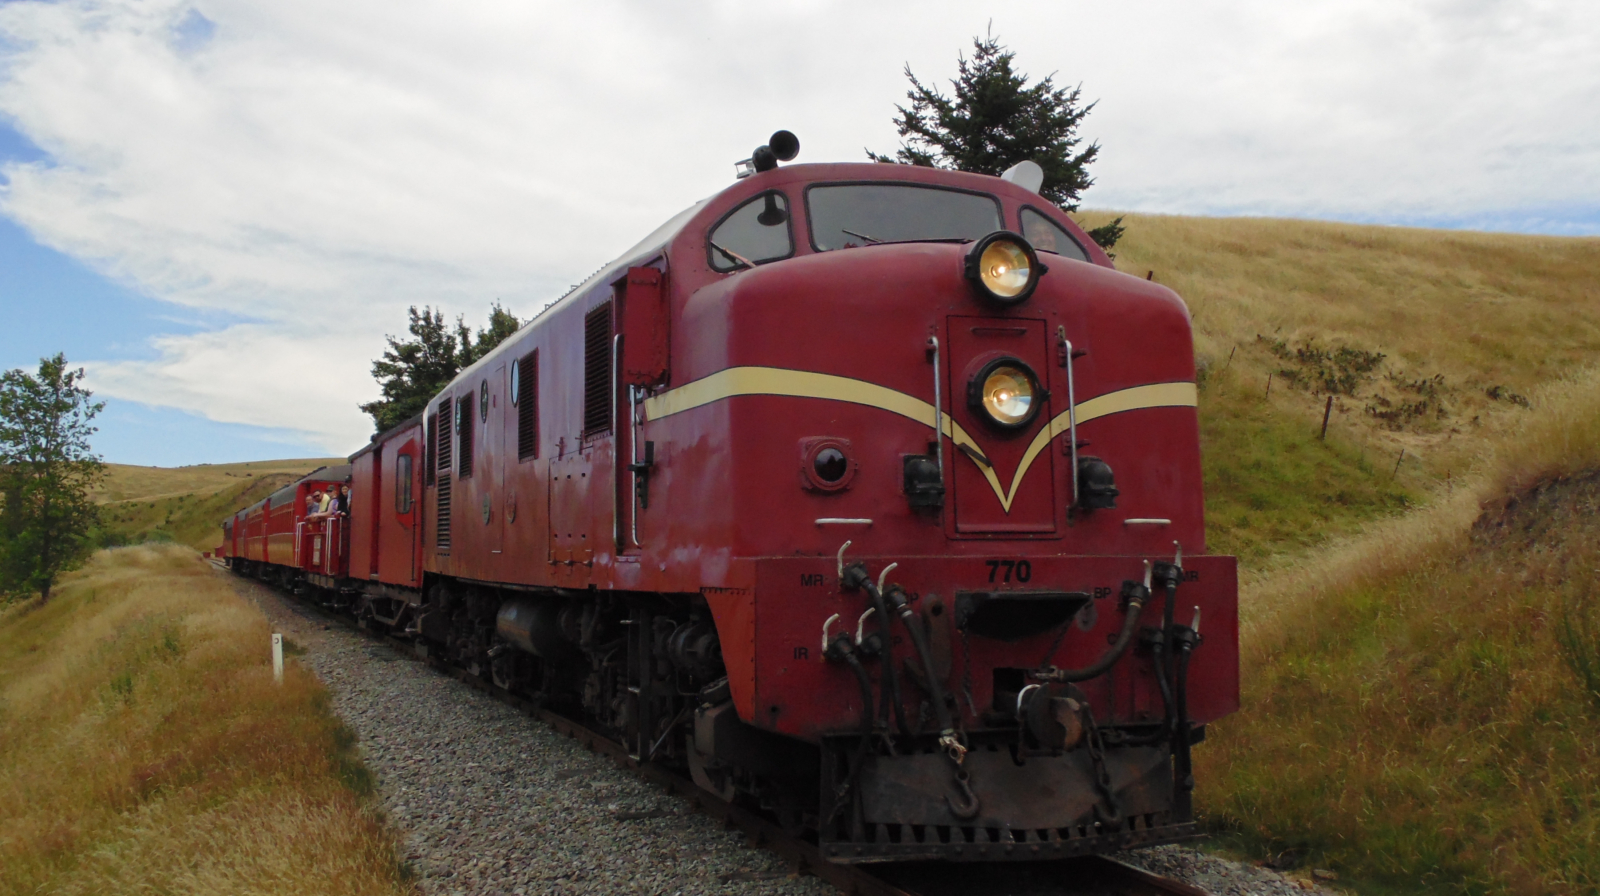 D<sup>G</sup> 770 in January 2017 on the Weka Pass Railway